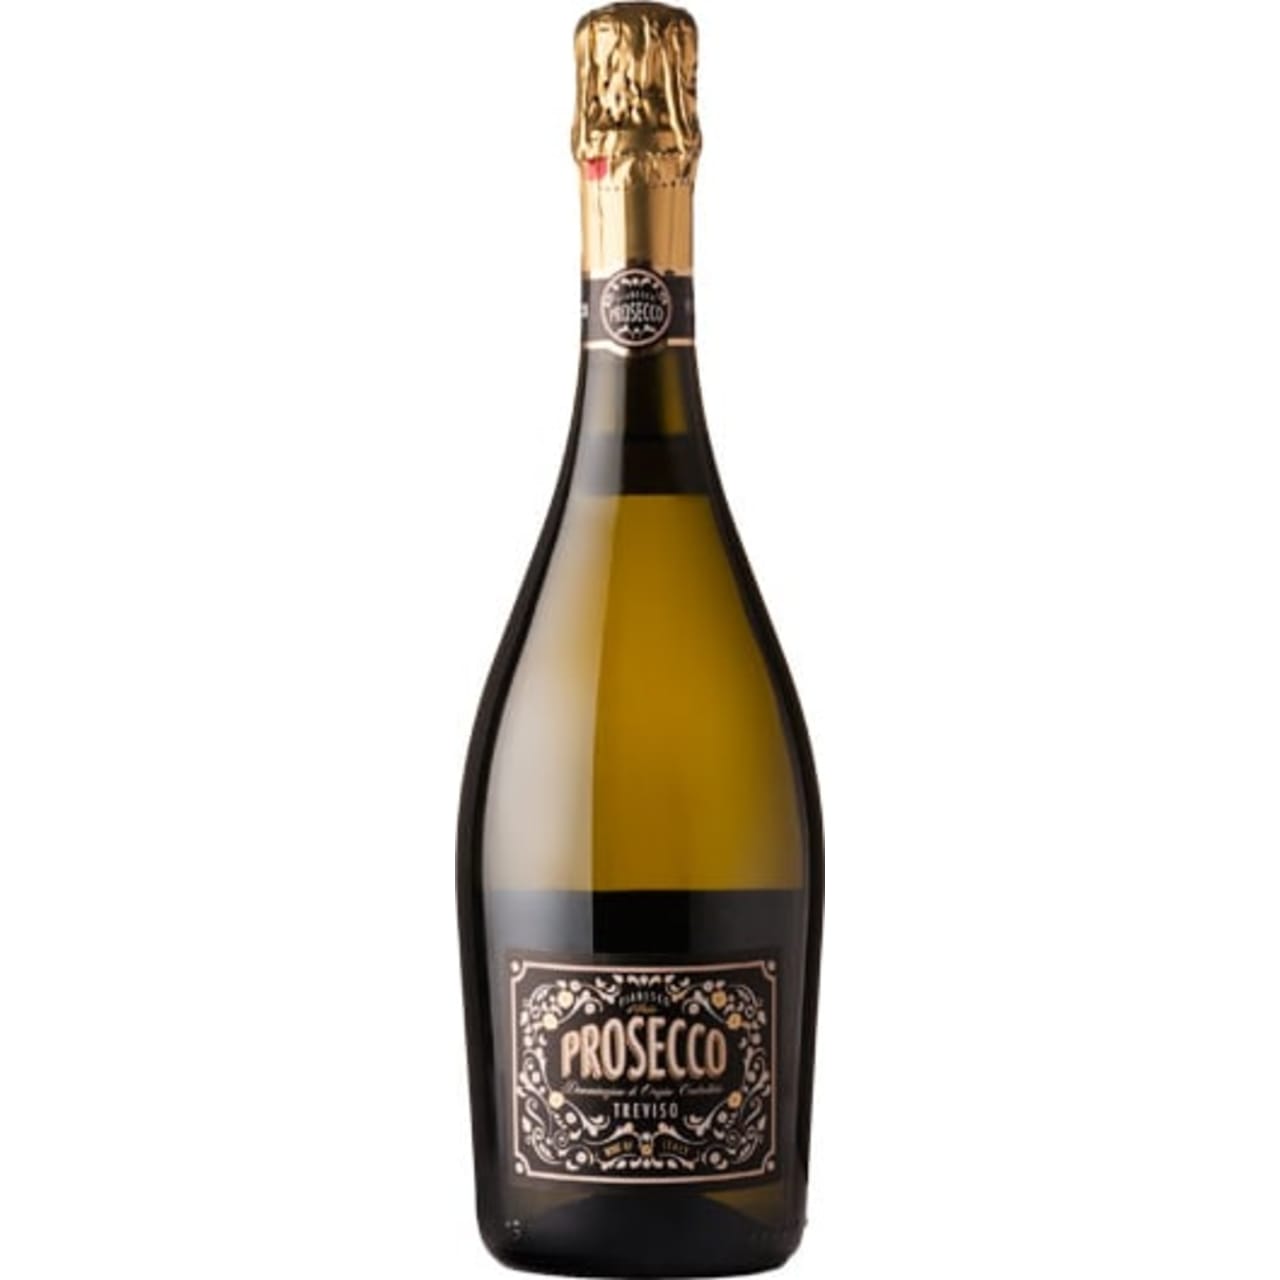 A lively crisp sparkling wine with a delicate lemony character and an aromatic, dry, refreshing finish.